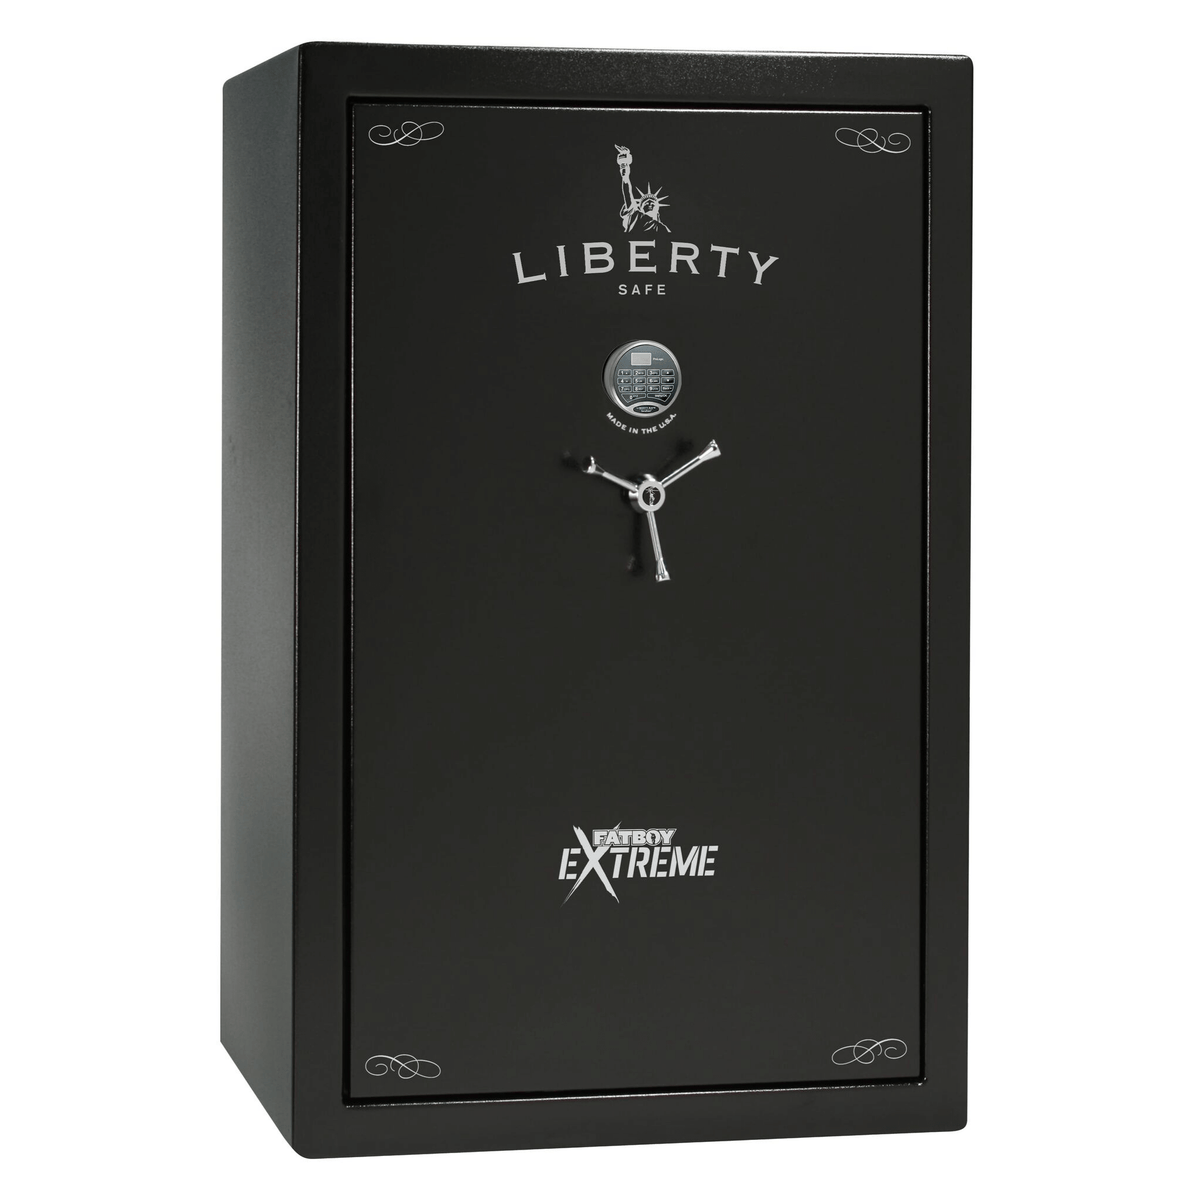 Fatboy Series | 64XT | Level 5 Security | 110 Minute Fire Protection | Dimensions: 60.5"(H) x 42"(W) x 27.5"(D) | Up to 60 Long Guns | Black Textured | Electronic Lock